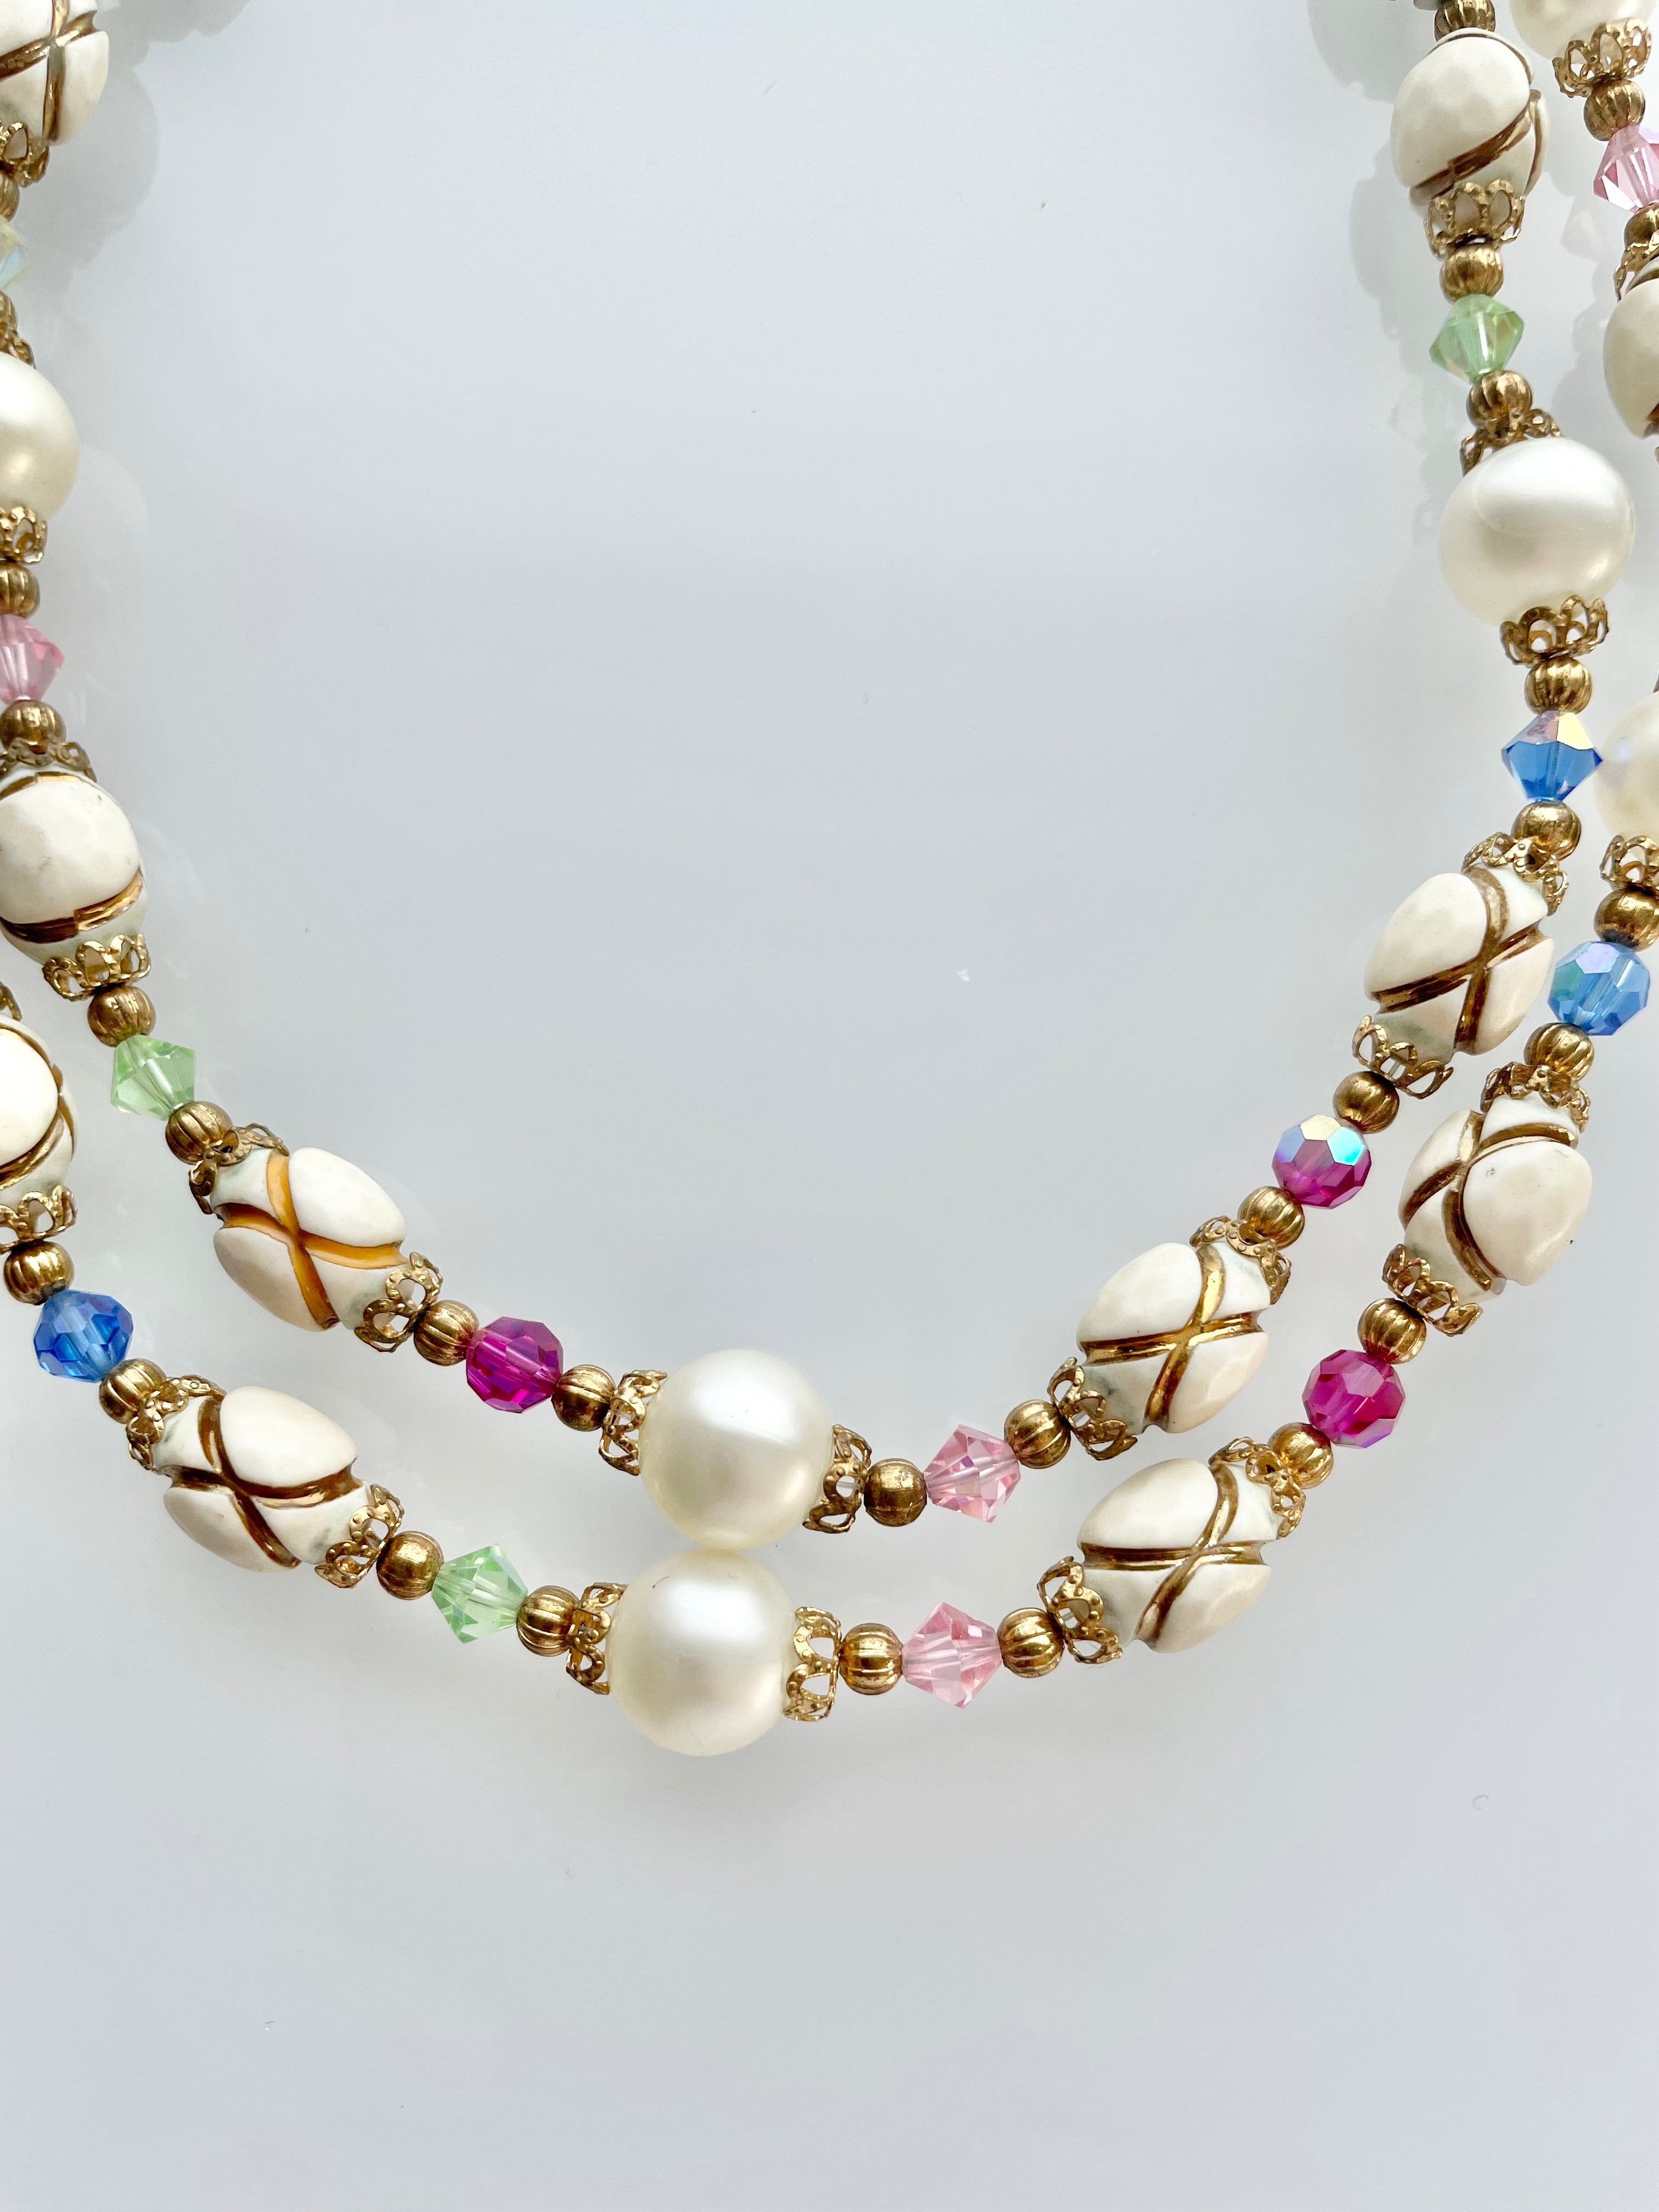 Isn't she charming... this lady loves a classic pearl necklace with a twist! Truly lovely....